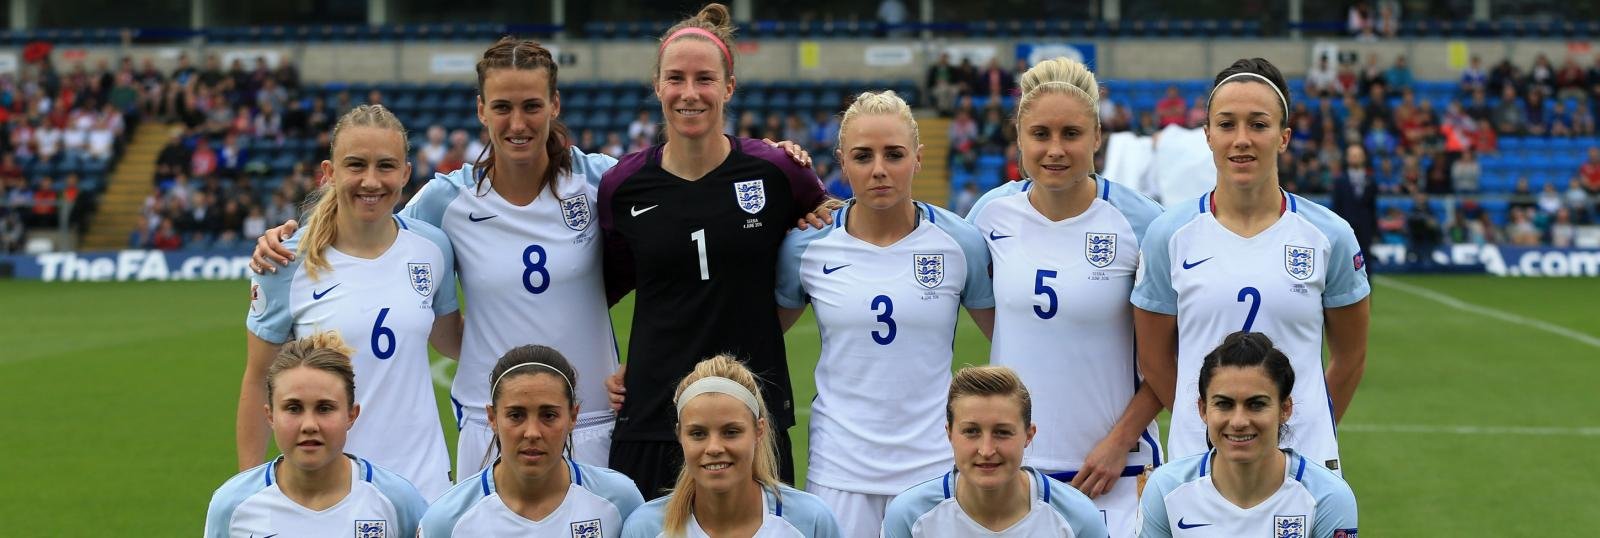 England’s Laura Bassett “disappointed” at Olympics snub, but focused on Euro 2017